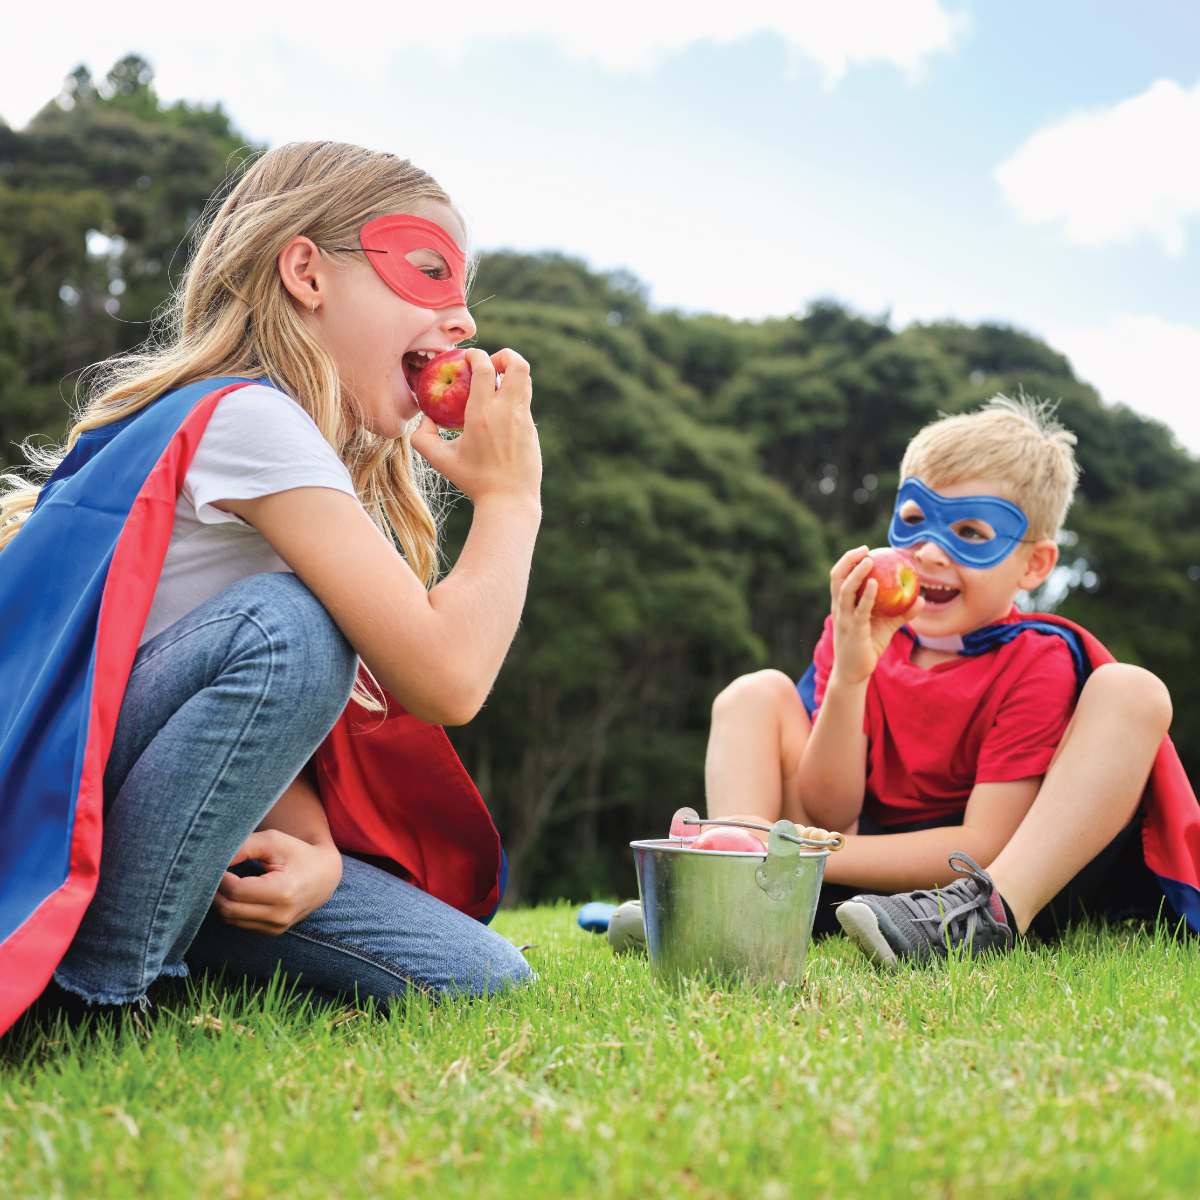 Even super heroes need a snack break 🦸‍♀️🦸‍♂️

Find JAZZ™ apples, the perfect playtime snack, in a store near you today by visiting our Store Locator: 

bit.ly/3hpTRKx

#JAZZapple #apples #JAZZapples #alwaysrefreshing #tangysweet #itsJAZZtime #freshfruit #snacktime